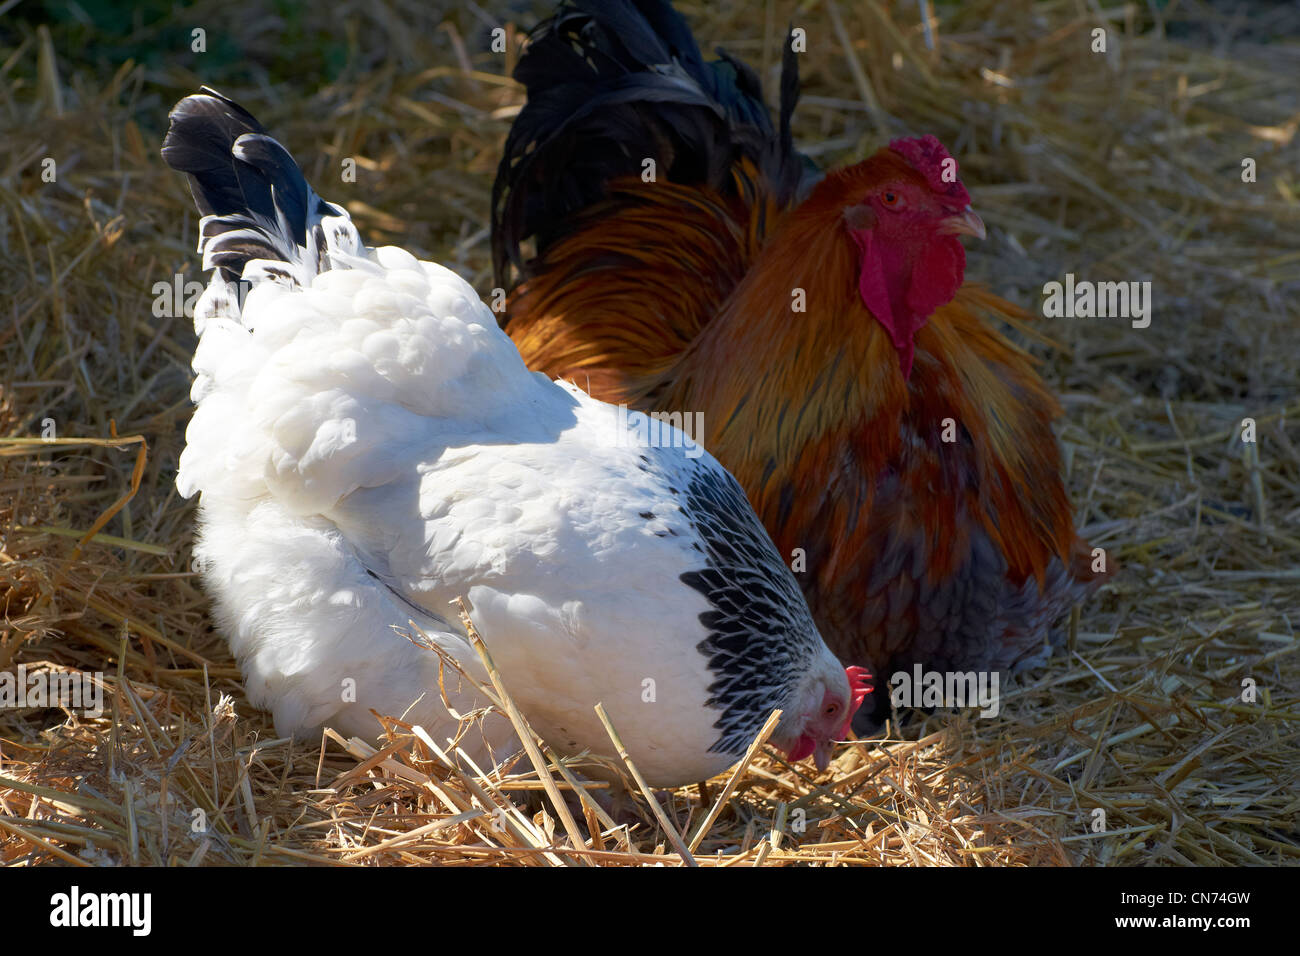 Speckled Sussex hen and red Sussex rooster or cockerel Stock Photo